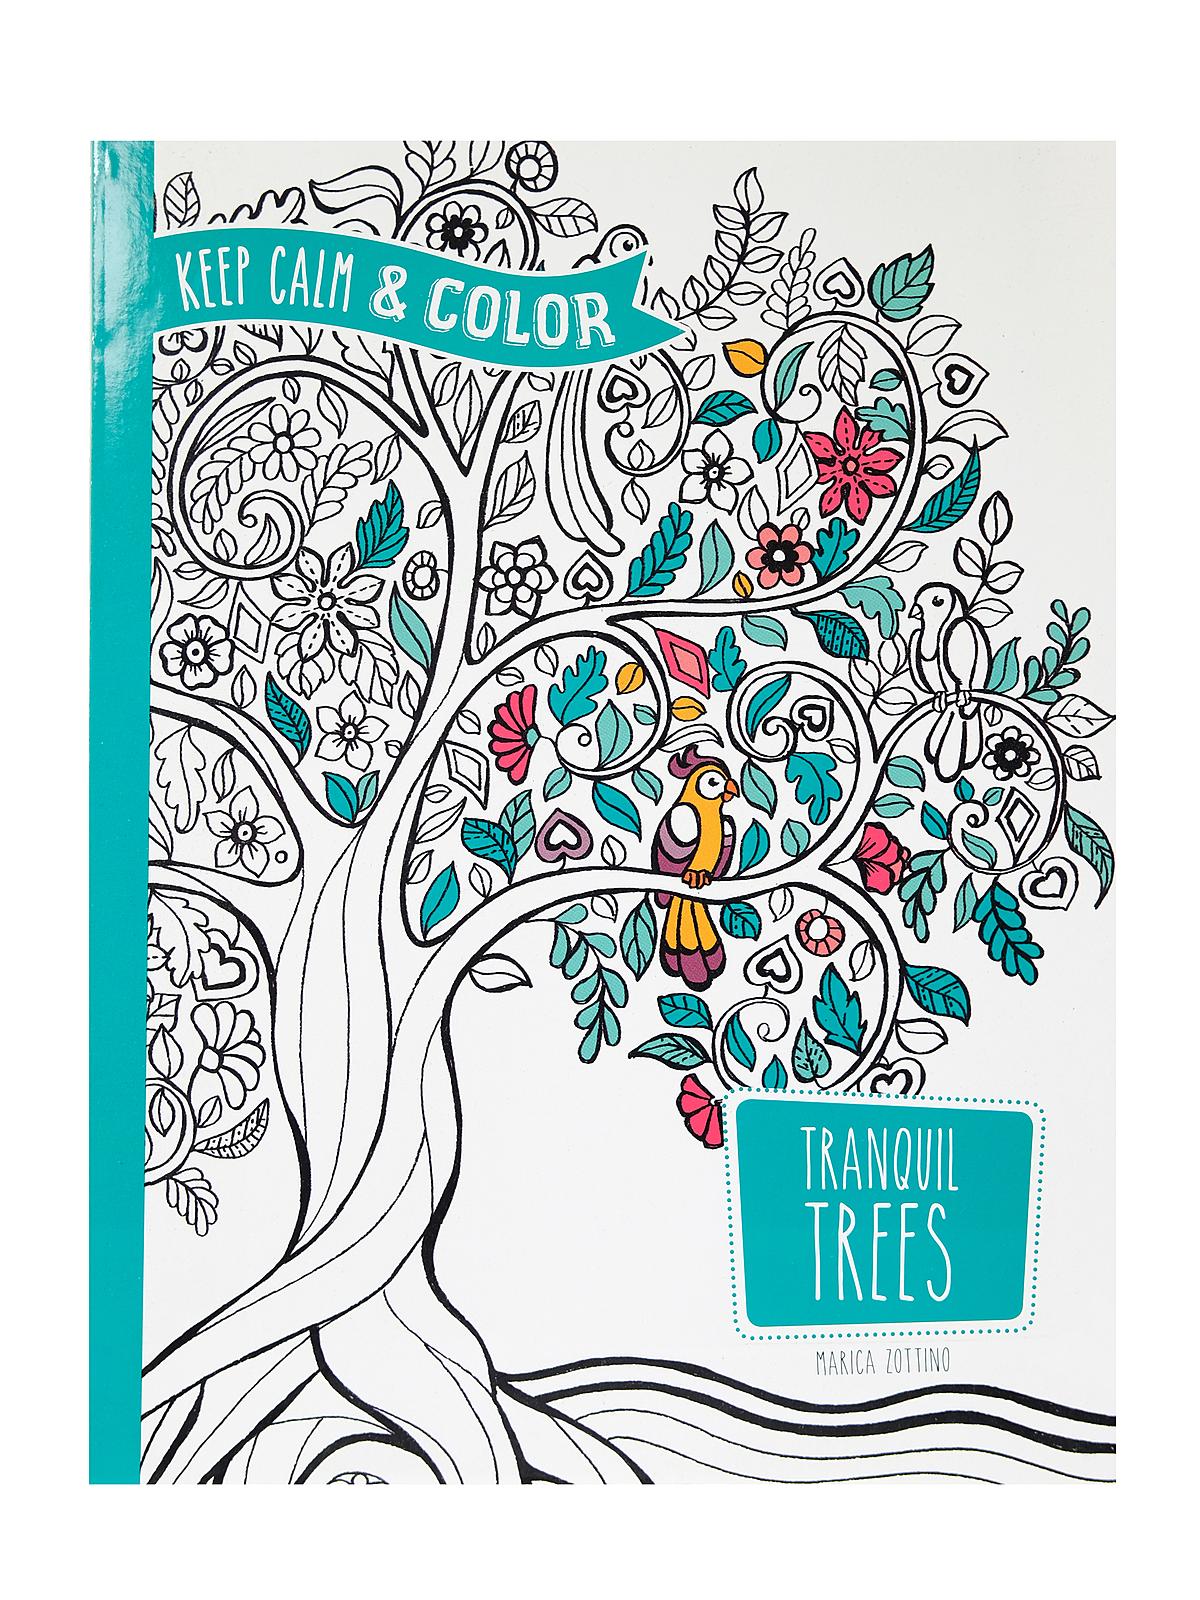 Keep Calm & Color Series Tranquil Trees